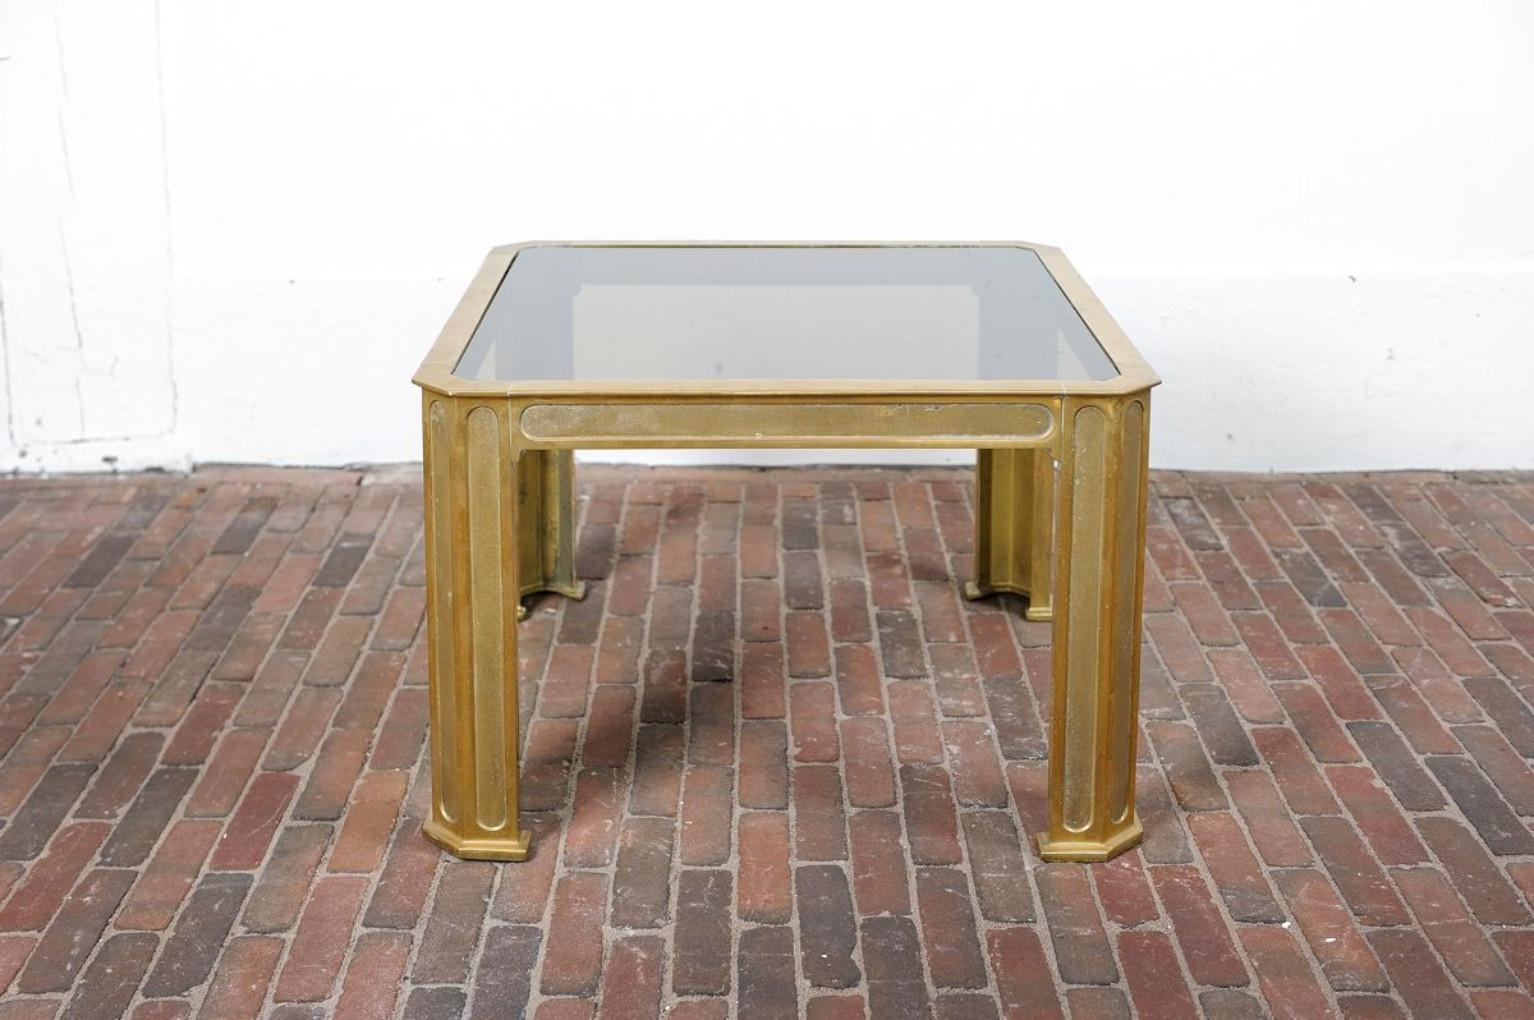 Super chic coffee table in solid bronze with glass top designed by Peter Van Heeck.
Cast Bronze, heavy and pure quality.

2 identical Tables available !